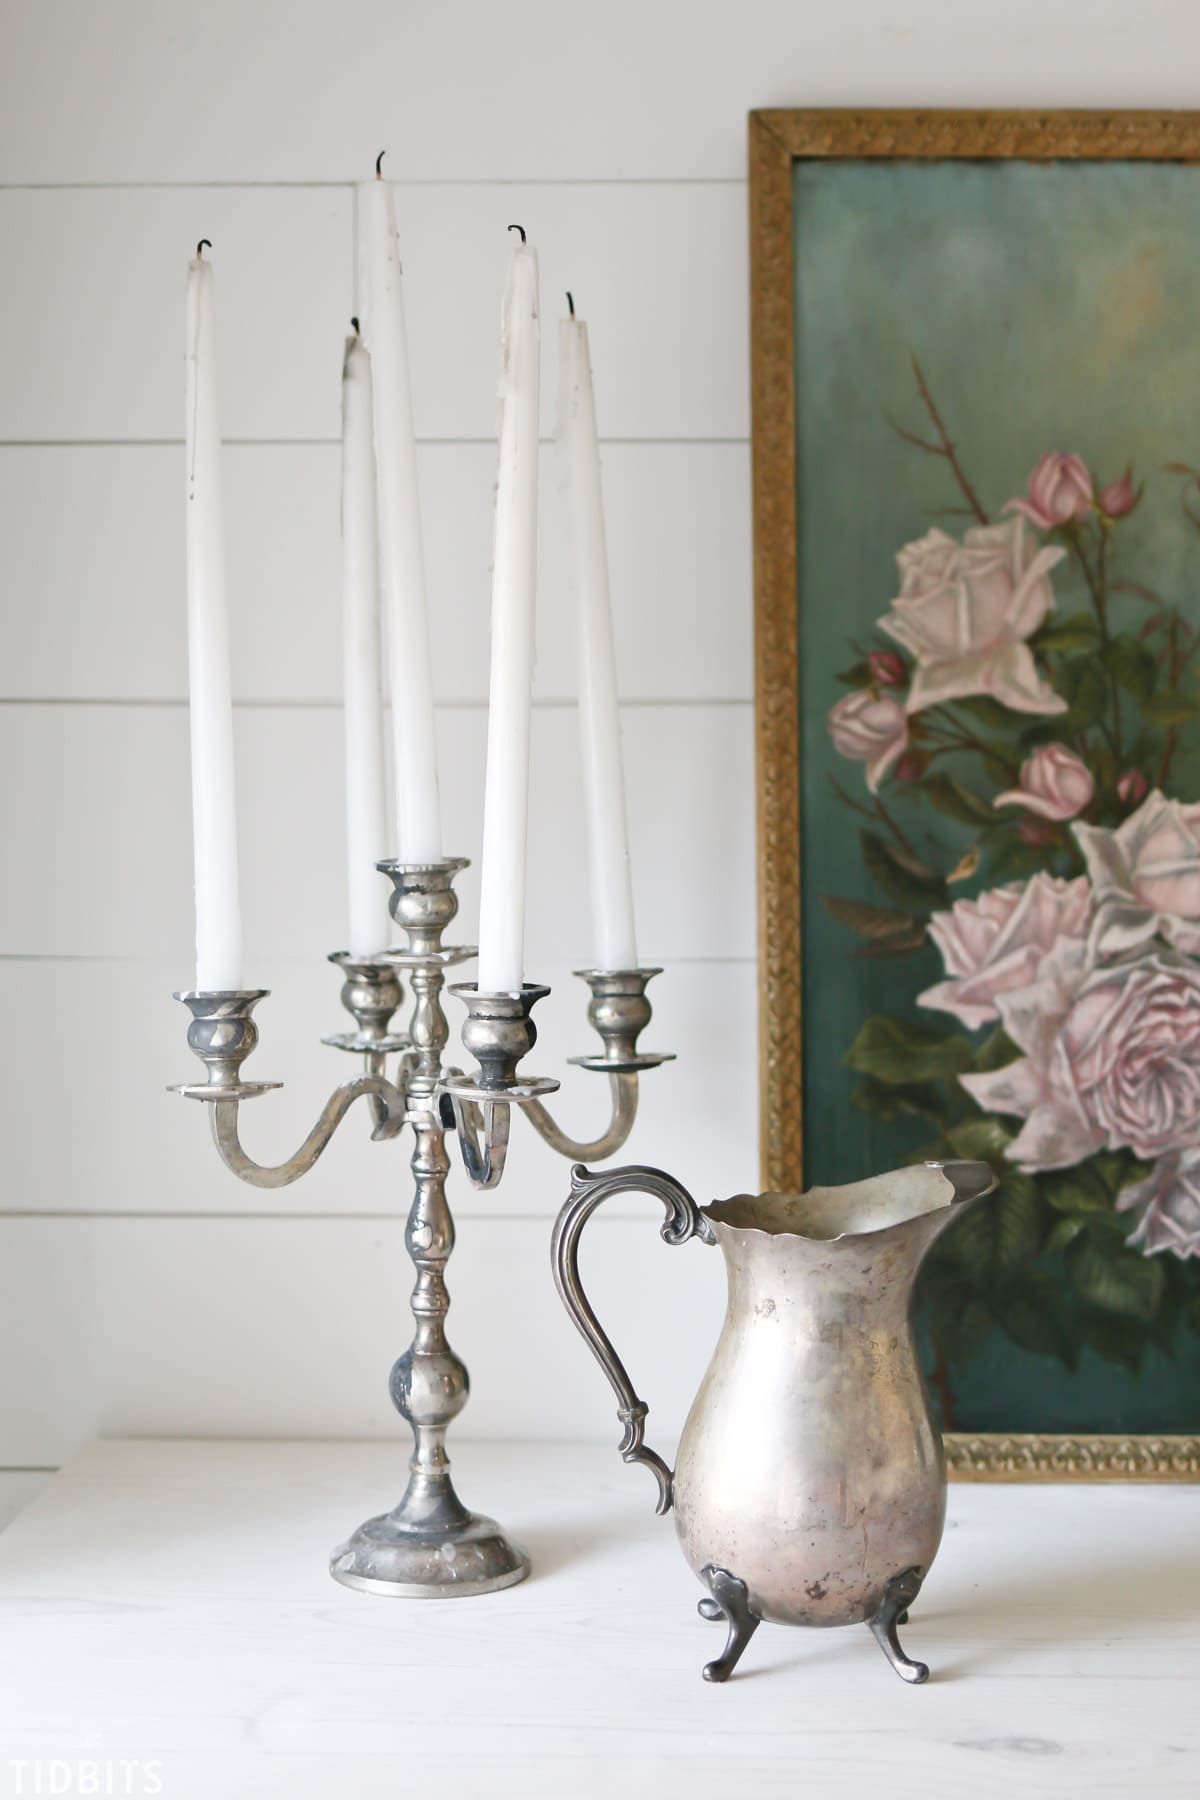 candelabra next to vintage French style pitcher